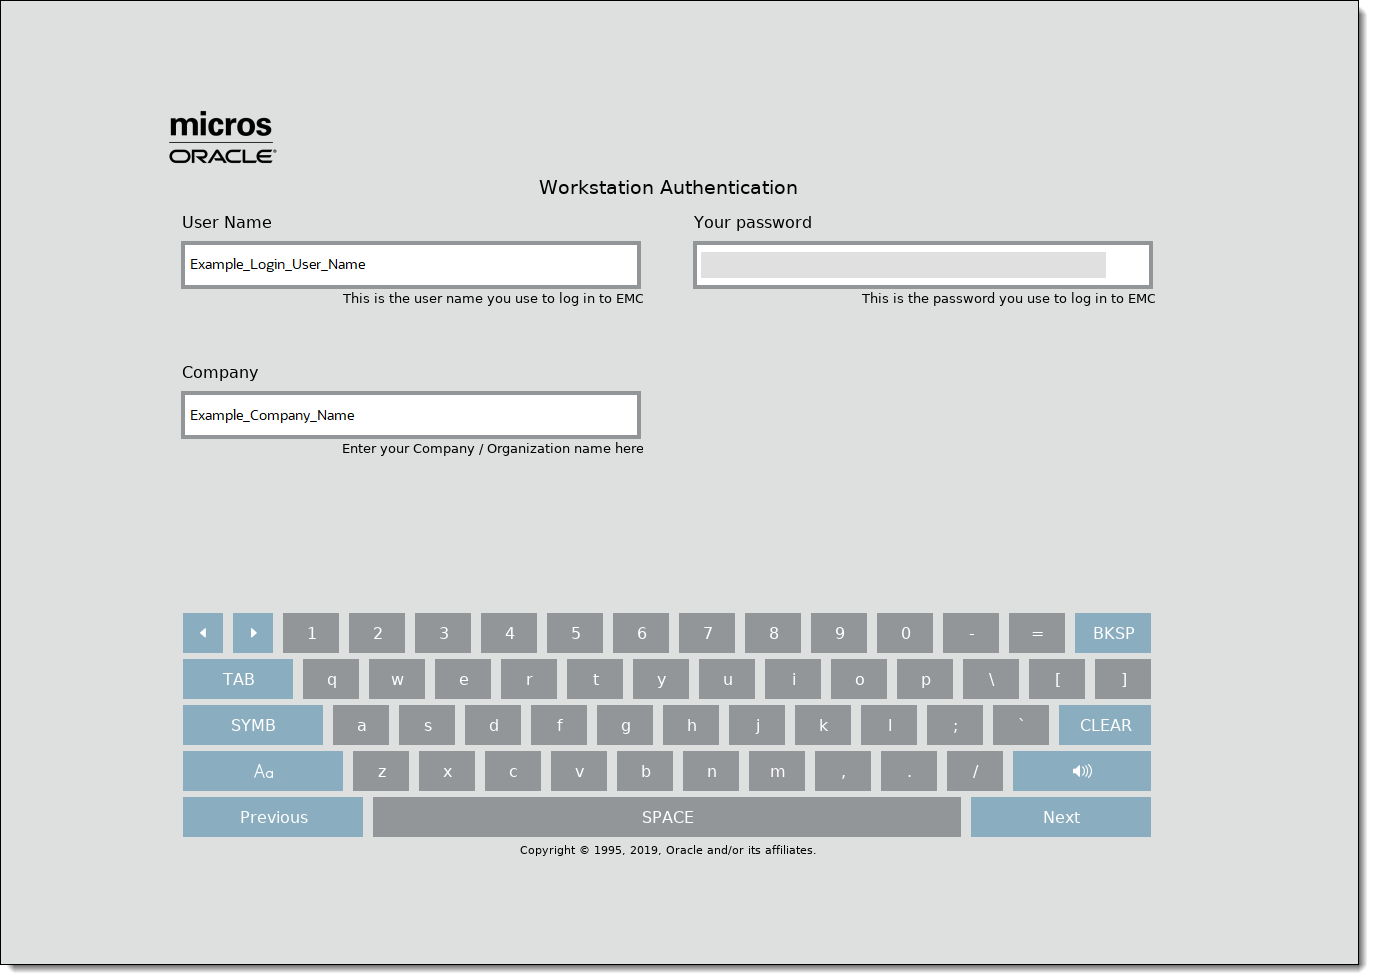 This figure shows the CAL Workstation Authentication window for Simphony Standard Cloud Service users.